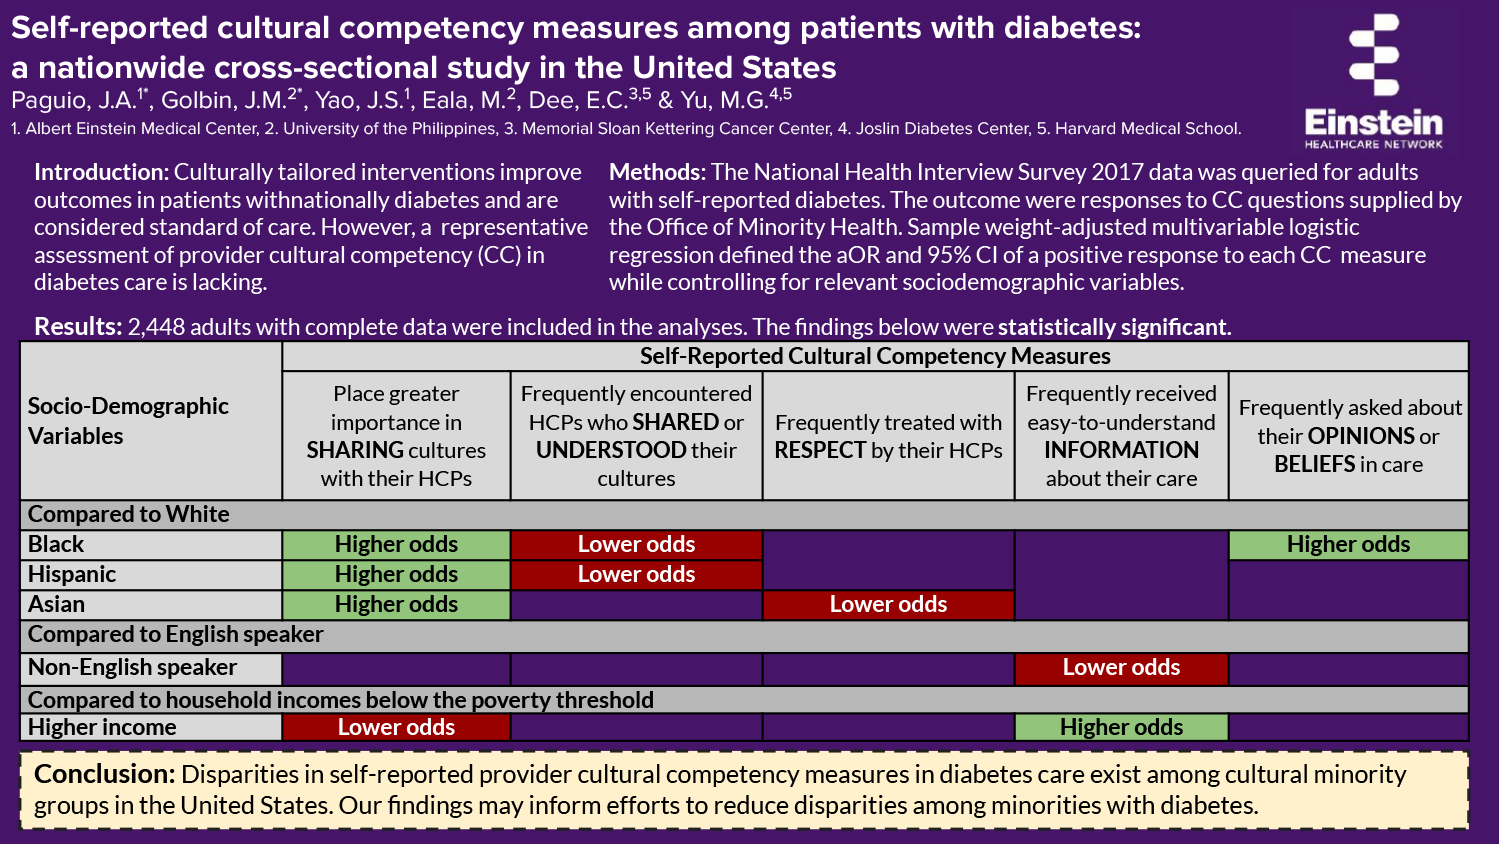 Joseph Alexander Paguio - PAS-74-Self-Reported-Cultural-Competency-Measures-Among-Patients-With-Diabetes